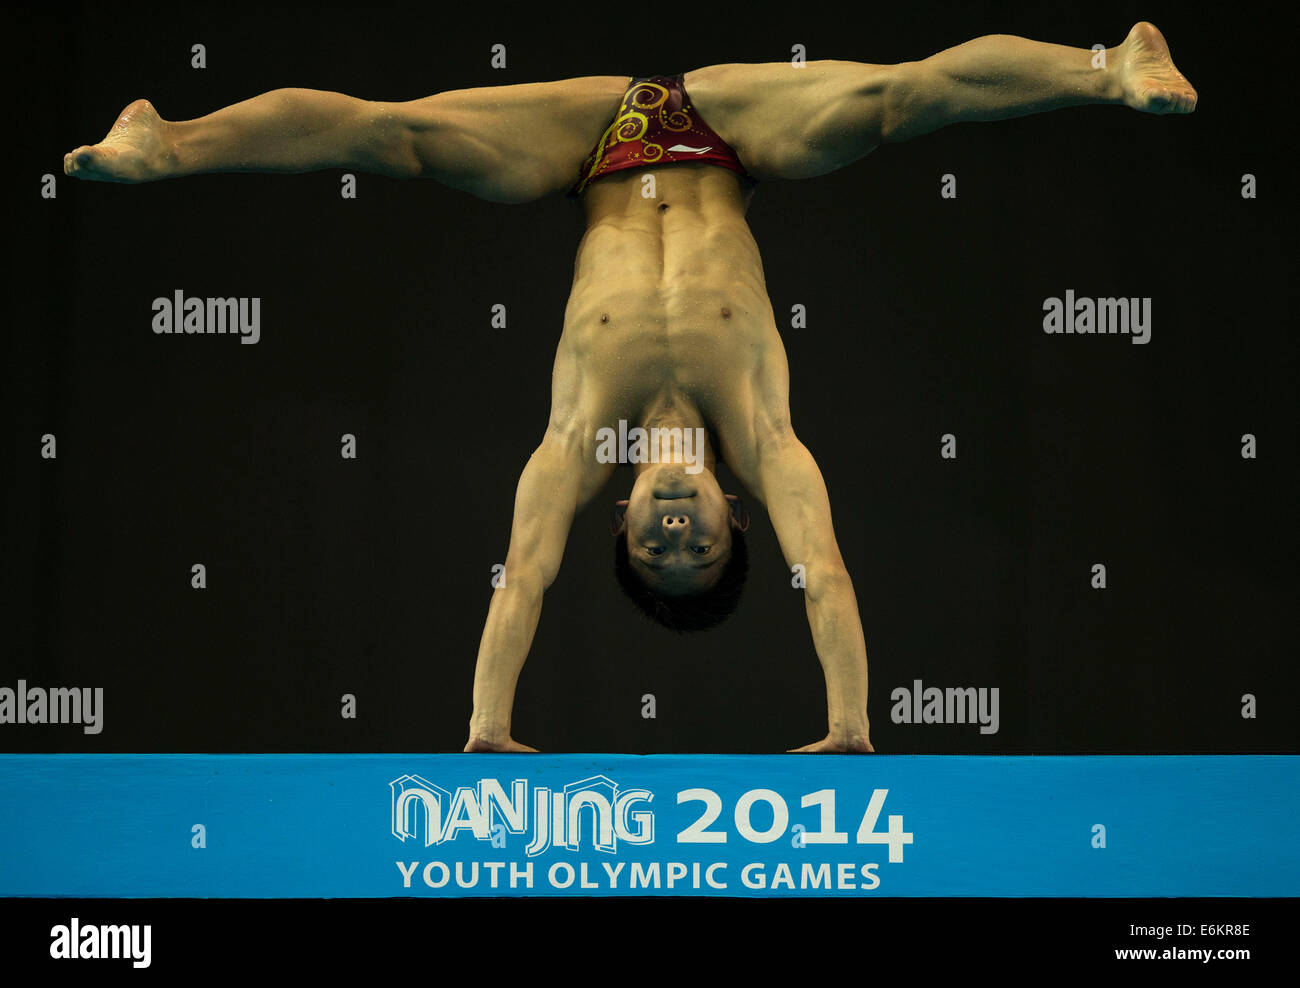 Nanjing, China's Jiangsu Province. 26th Aug, 2014. Yang Hao of China competes during the Men?s 10m Platform final match of diving event at the Nanjing 2014 Youth Olympic Games in Nanjing, capital of east China's Jiangsu Province, on Aug. 26, 2014. Yang Hao won the gold medal. Credit:  Fei Maohua/Xinhua/Alamy Live News Stock Photo